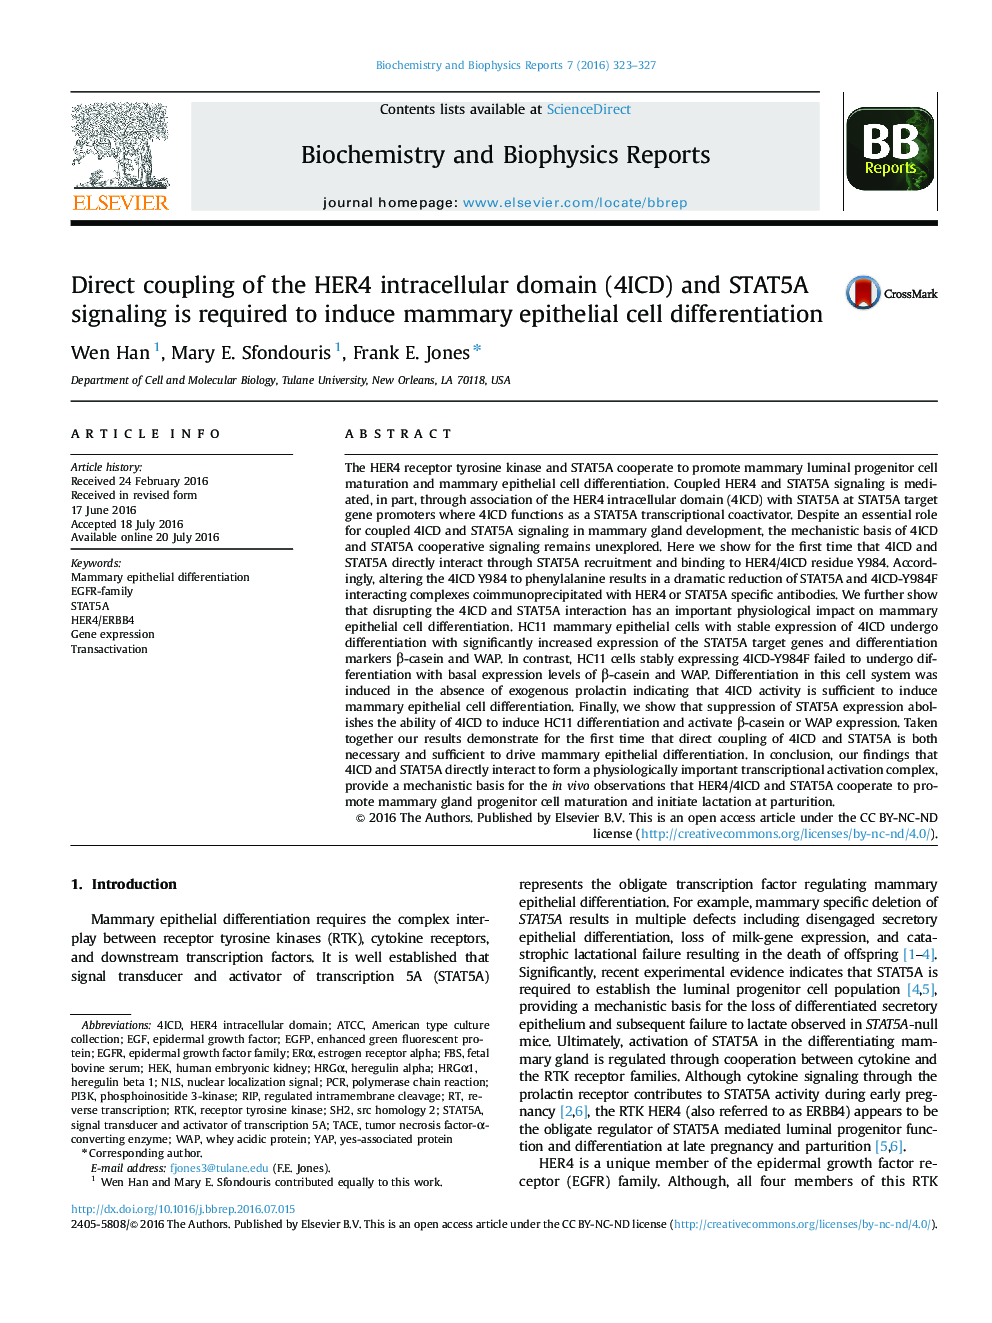 Direct coupling of the HER4 intracellular domain (4ICD) and STAT5A signaling is required to induce mammary epithelial cell differentiation